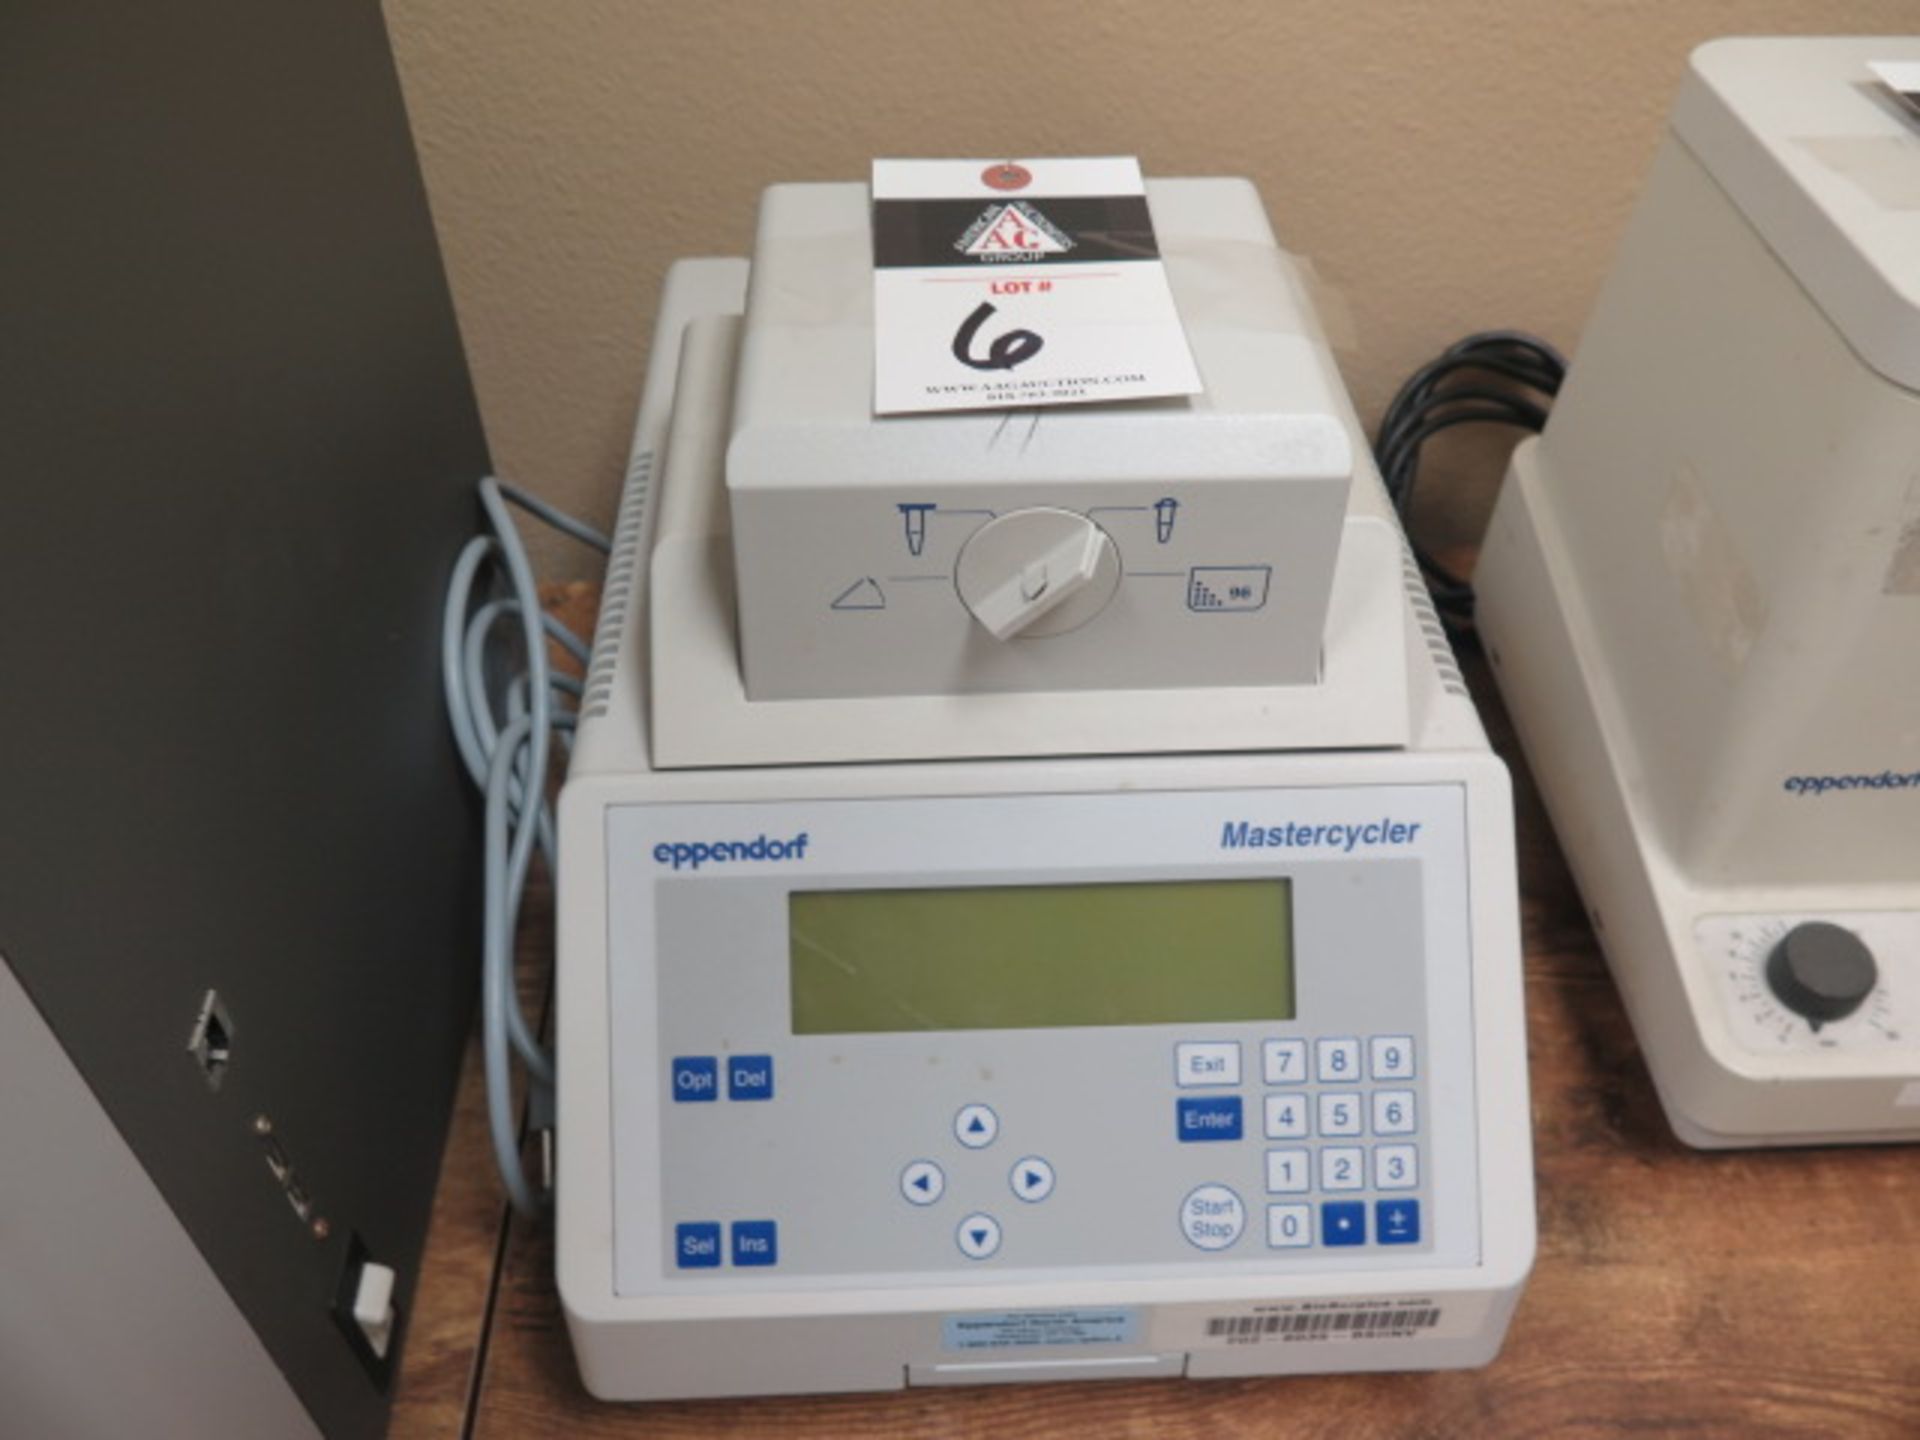 Eppendorf “Mastercycler” Thermocycler (SOLD AS-IS - NO WARRANTY)